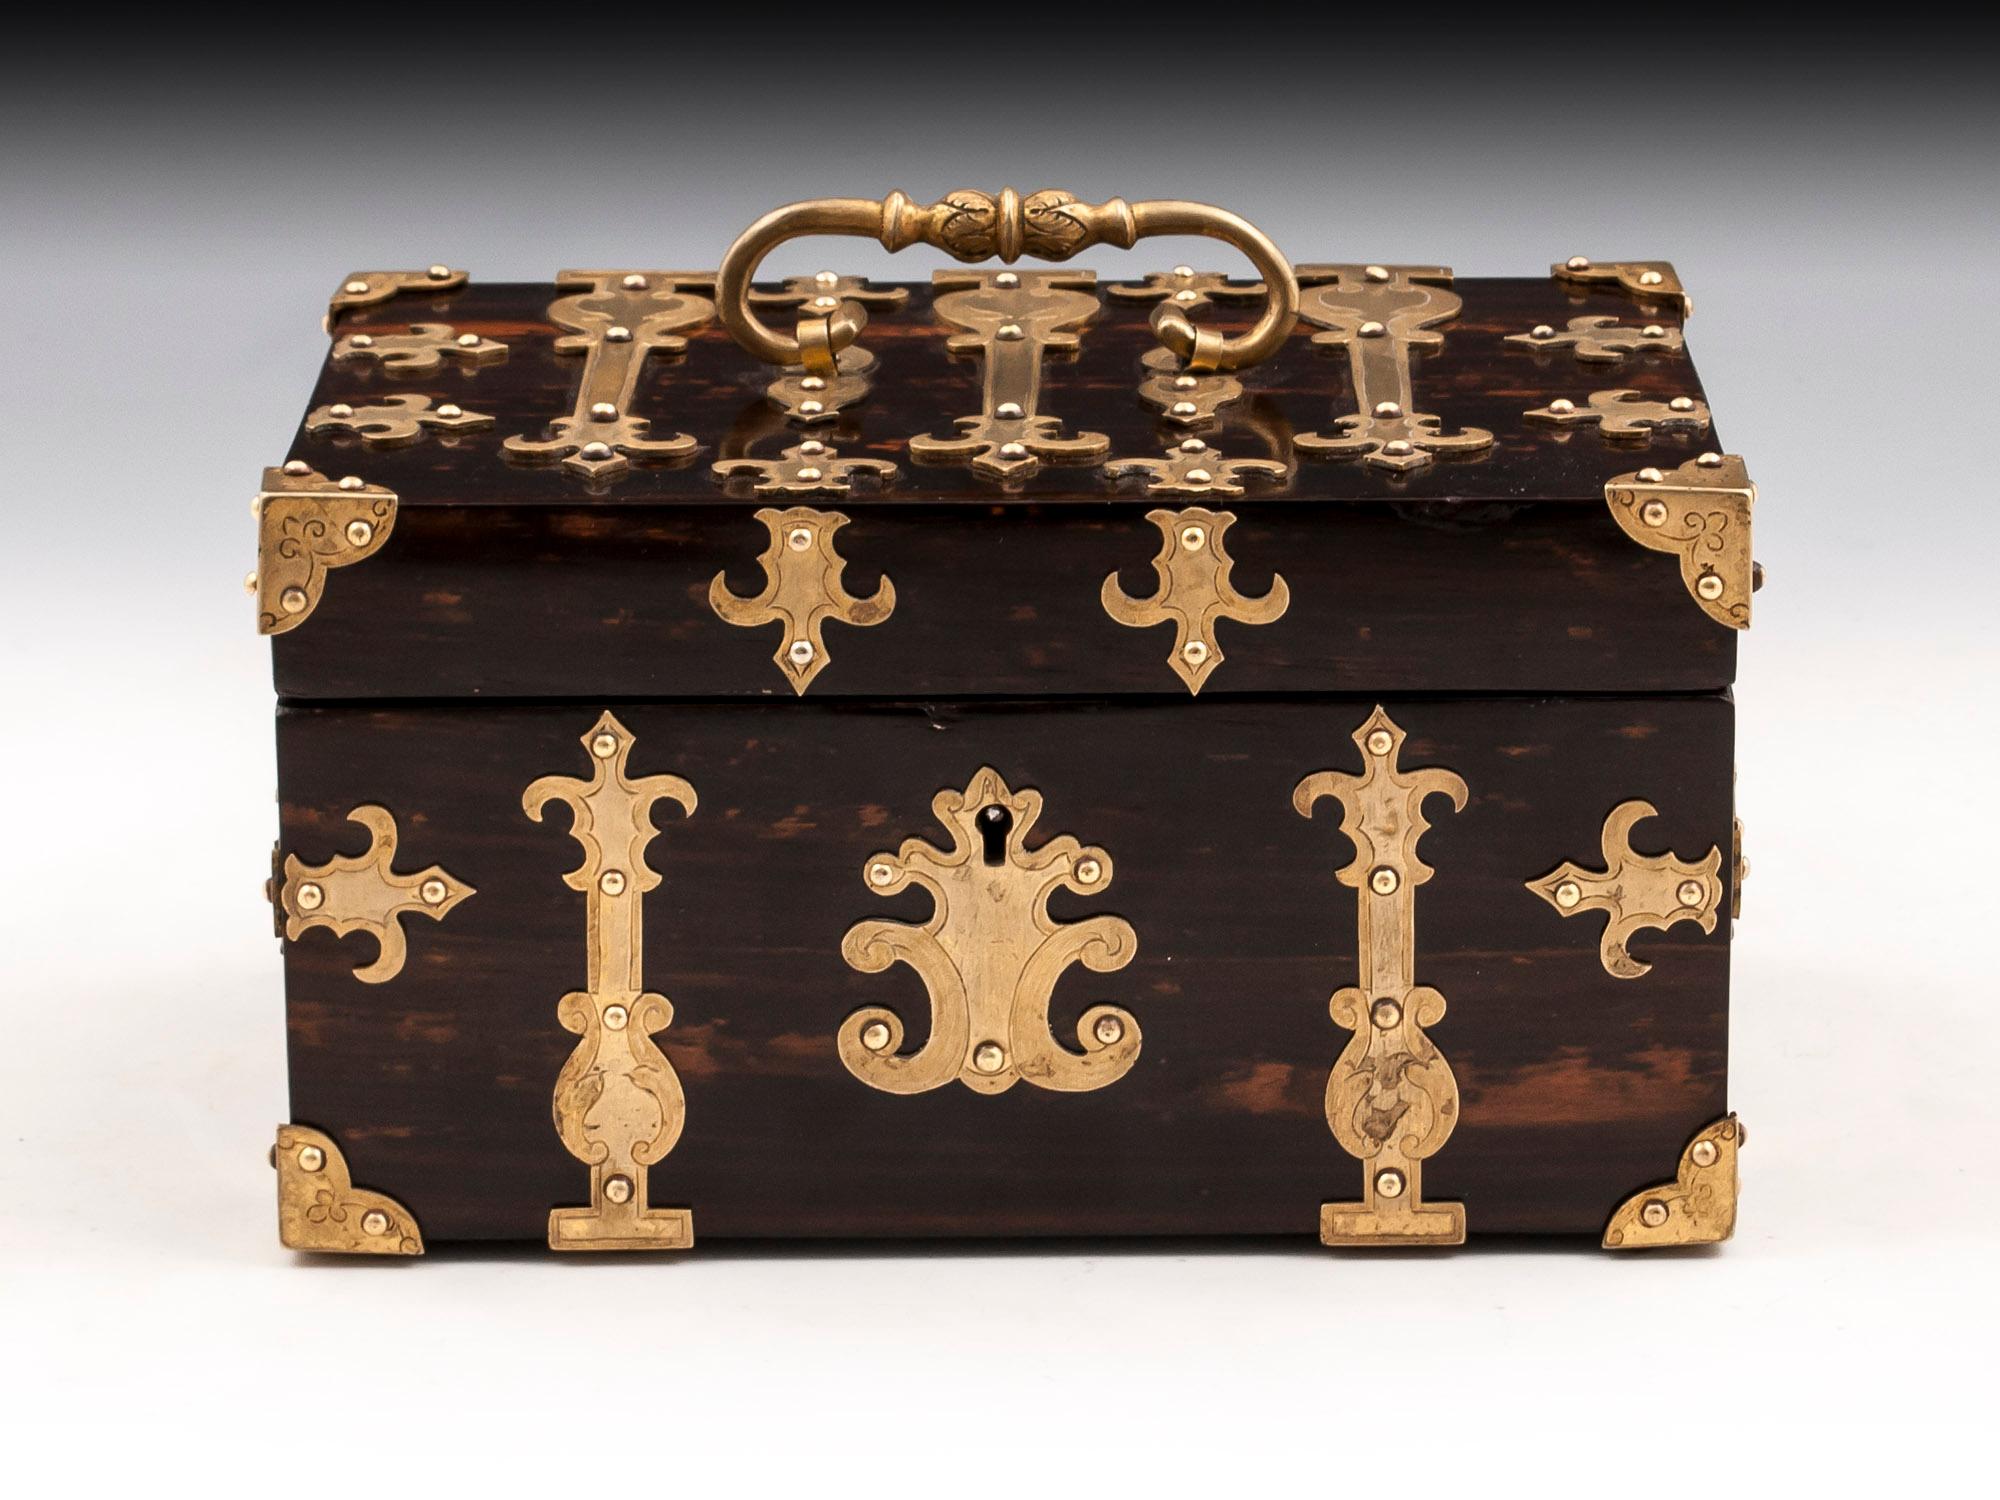 Antique Coromandel trinket box with ornate engraved applied brass mounts, corner brackets, carry handle and escutcheon. 

The interior is lined in vibrant marble effect paper with a cushioned velvet pad for the base. 

This antique trinket box